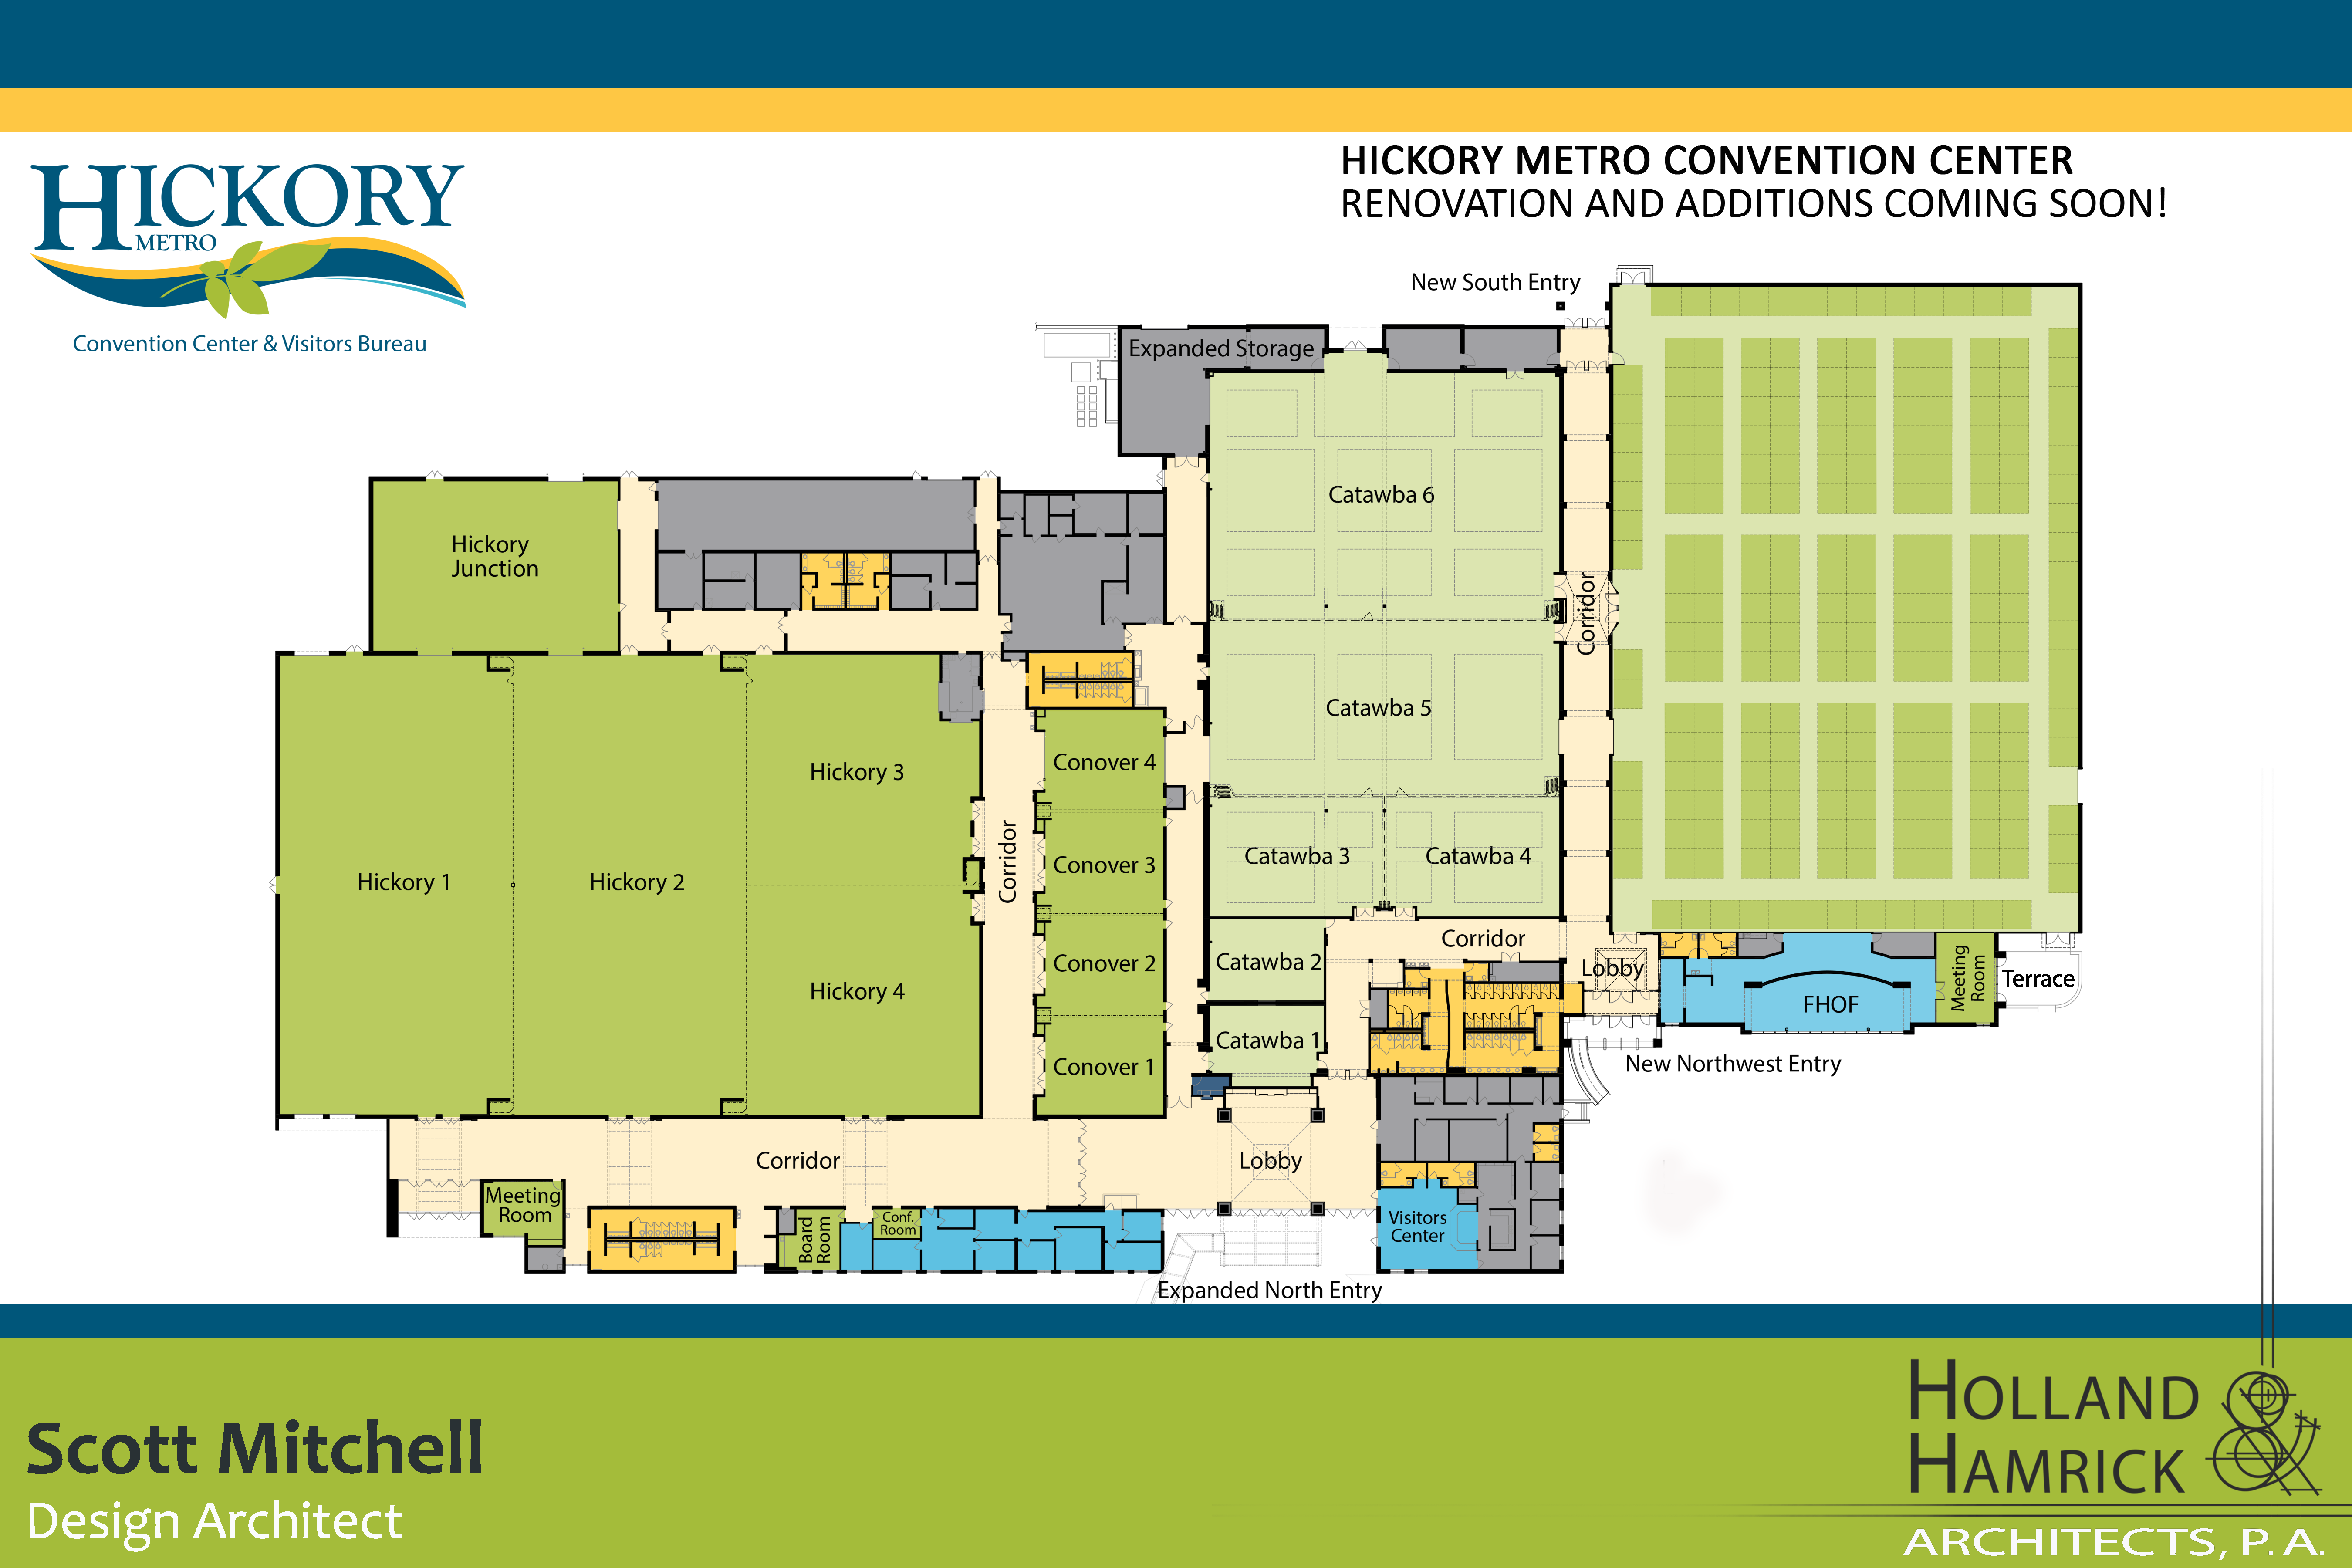 Hickory Metro Convention Center expansion moves forward City of Hickory